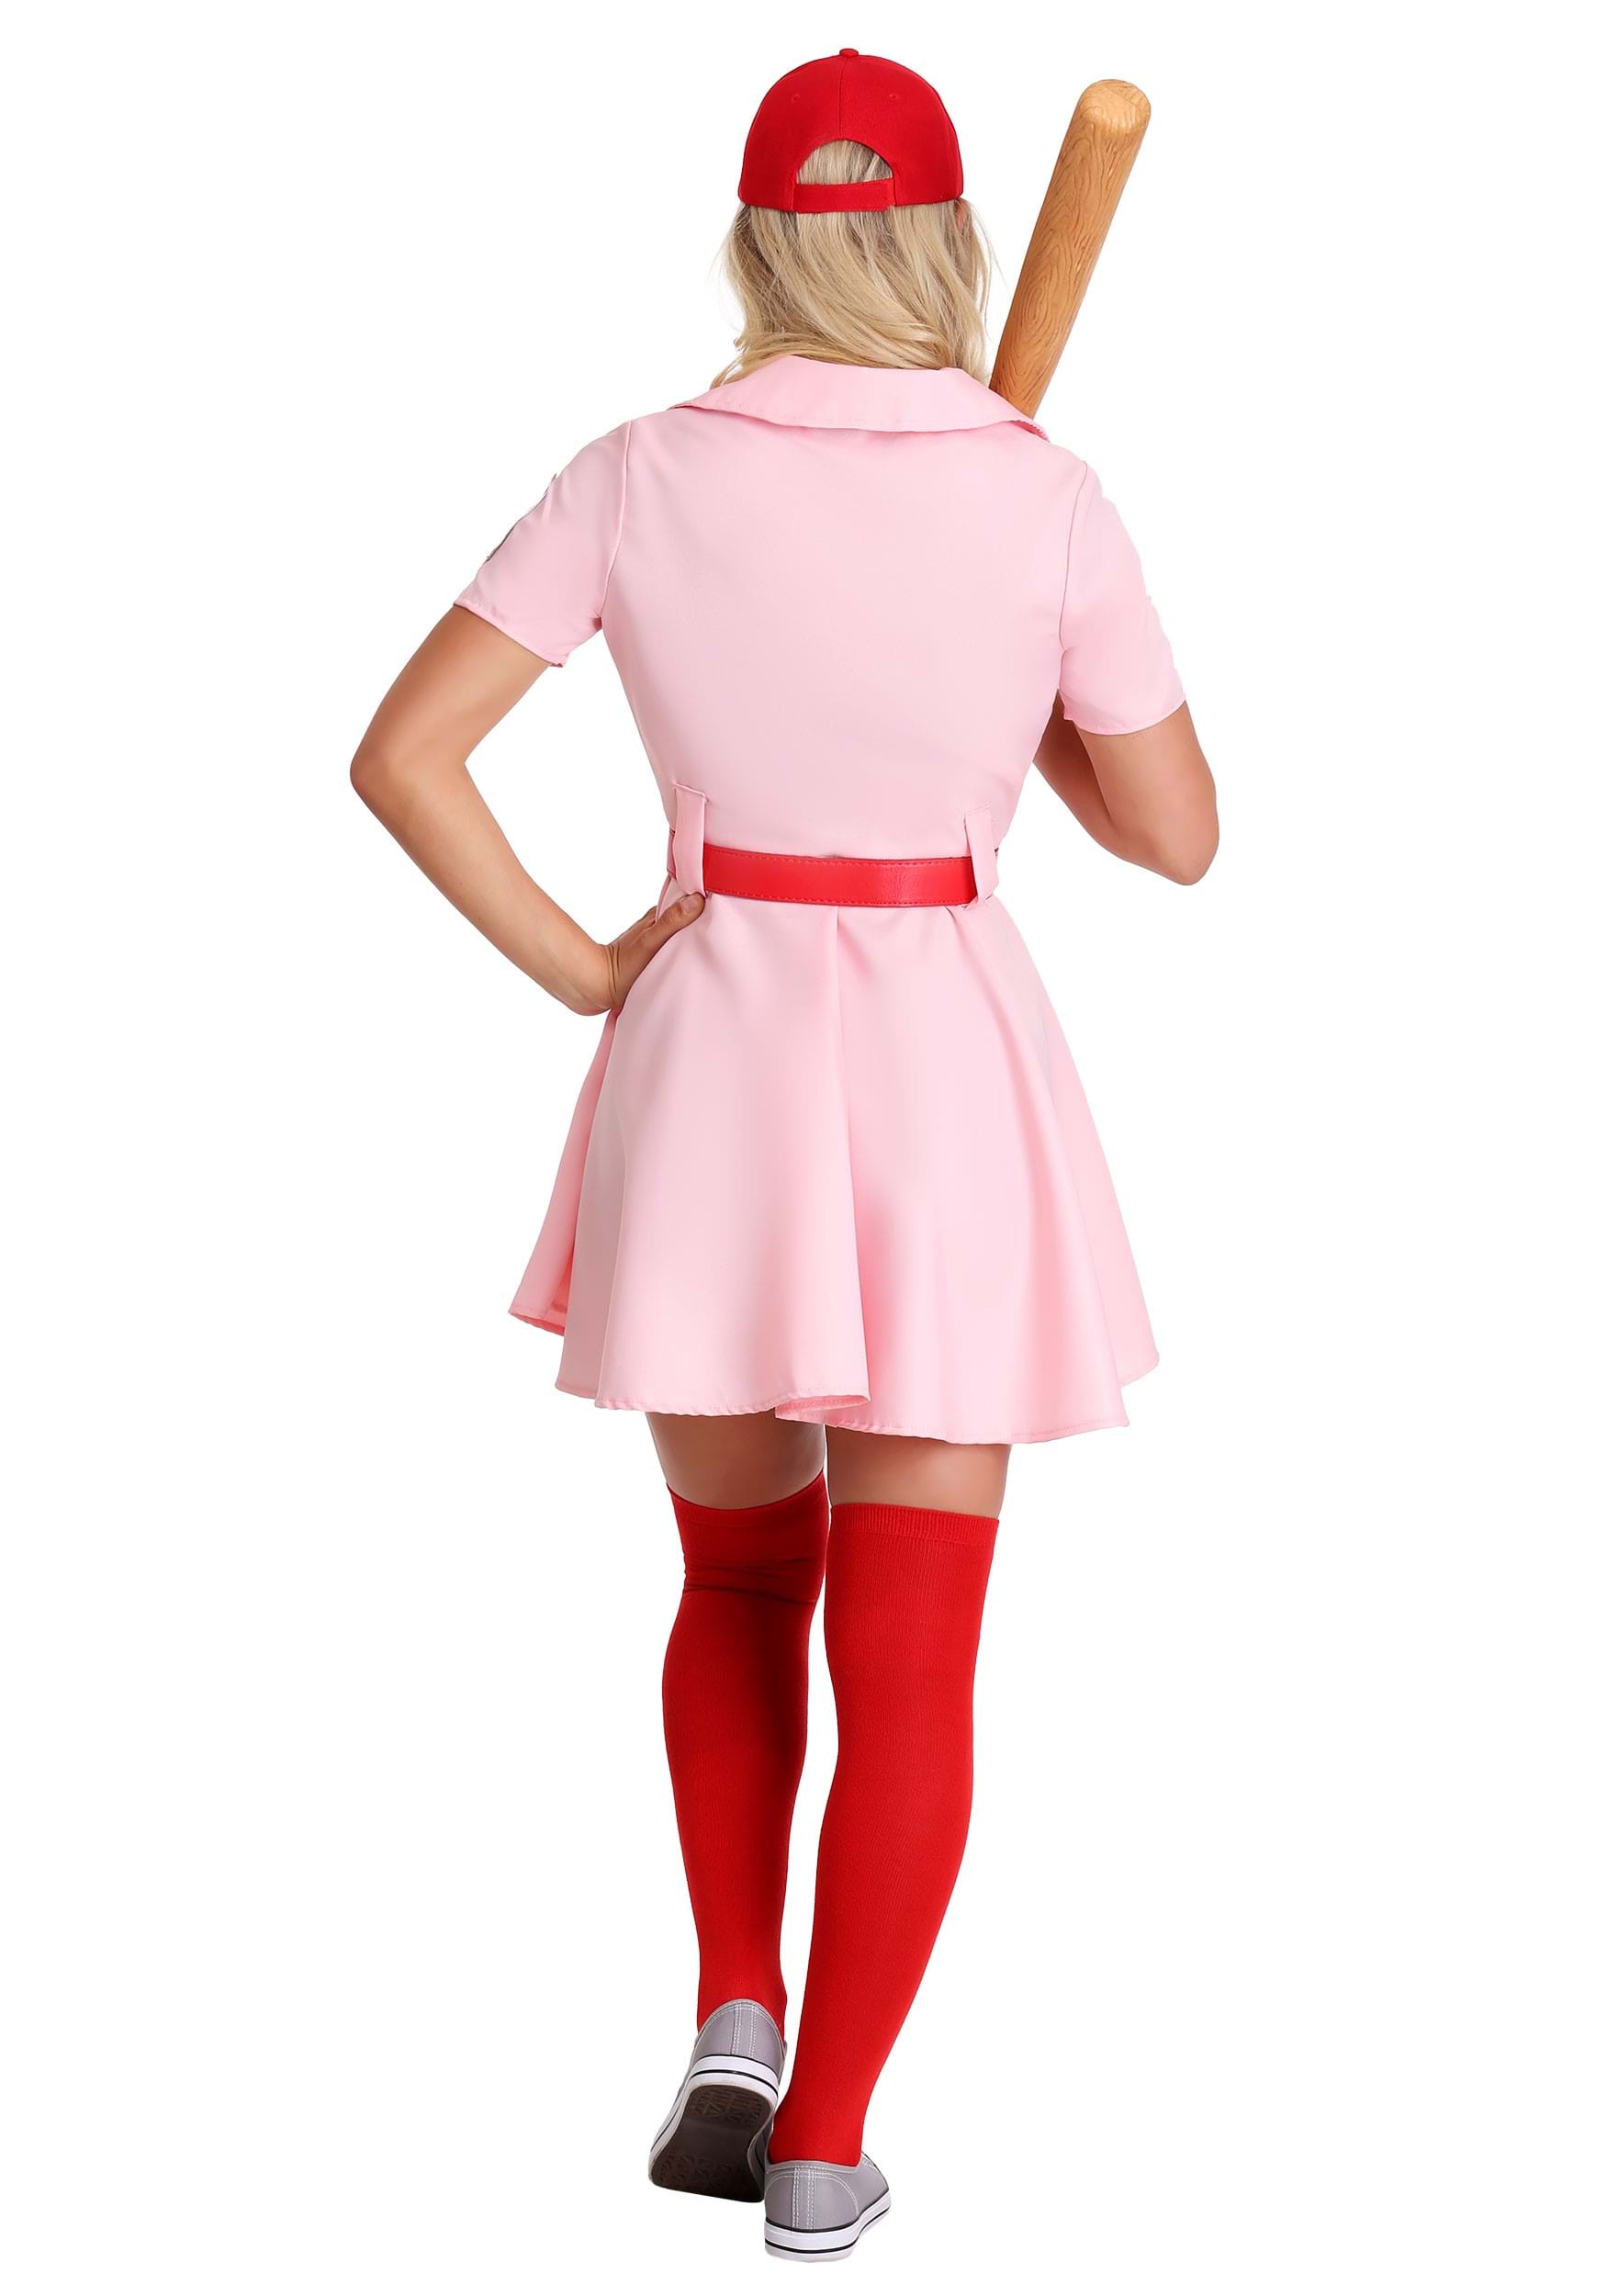 Women's Plus Size Deluxe Dottie Costume from A League of Their Own